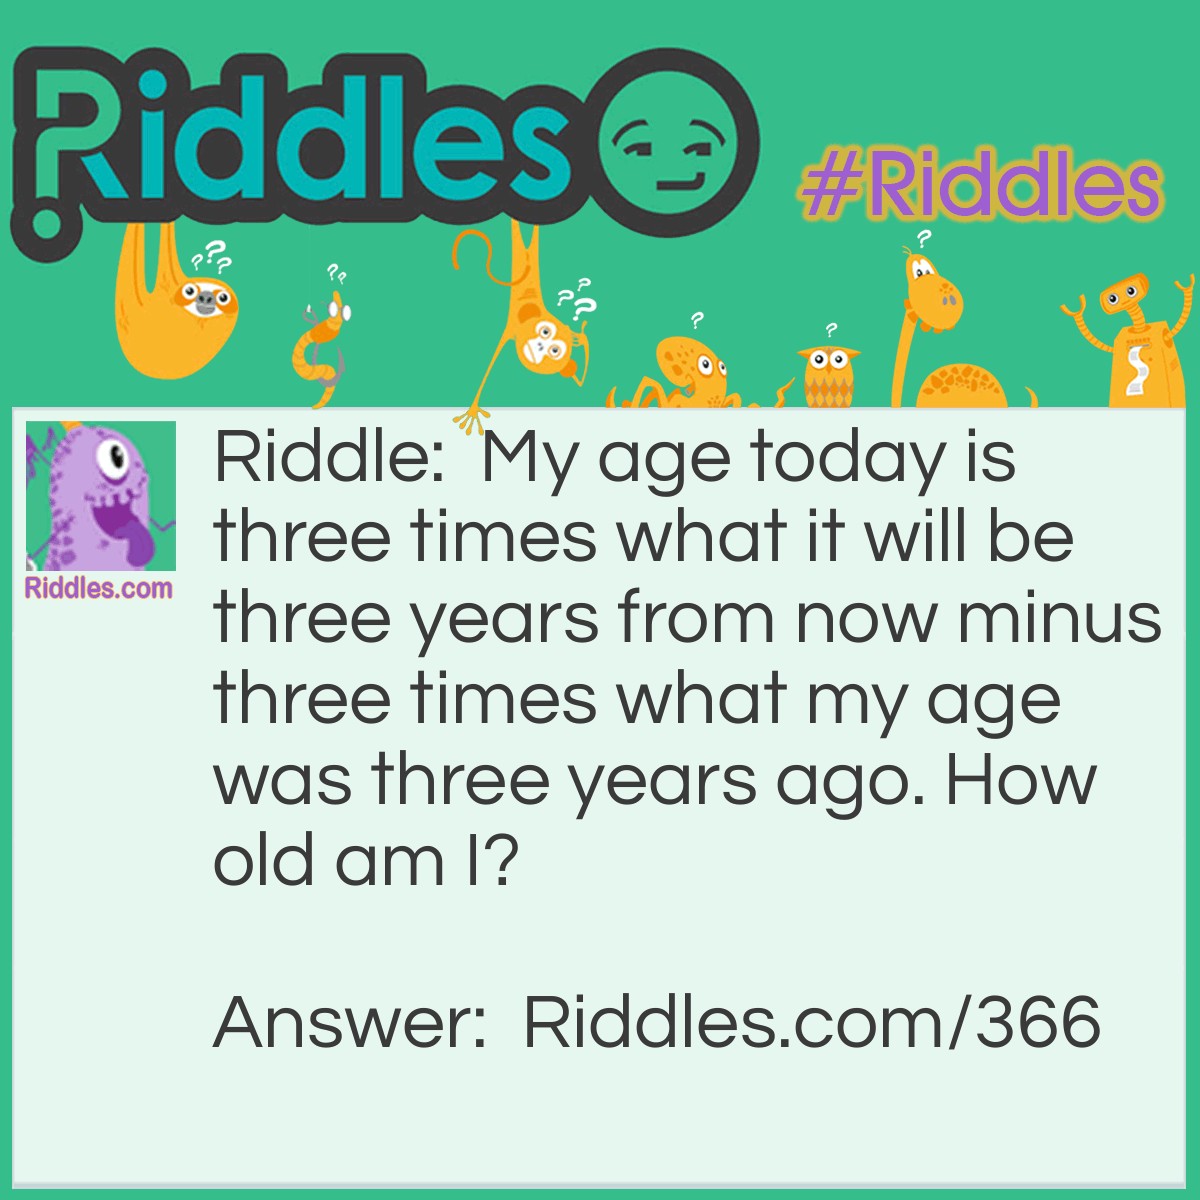 Riddle: My age today is three times what it will be three years from now minus three times what my age was three years ago. How old am I? Answer: Don't be too confused, the answer is 18 years old.